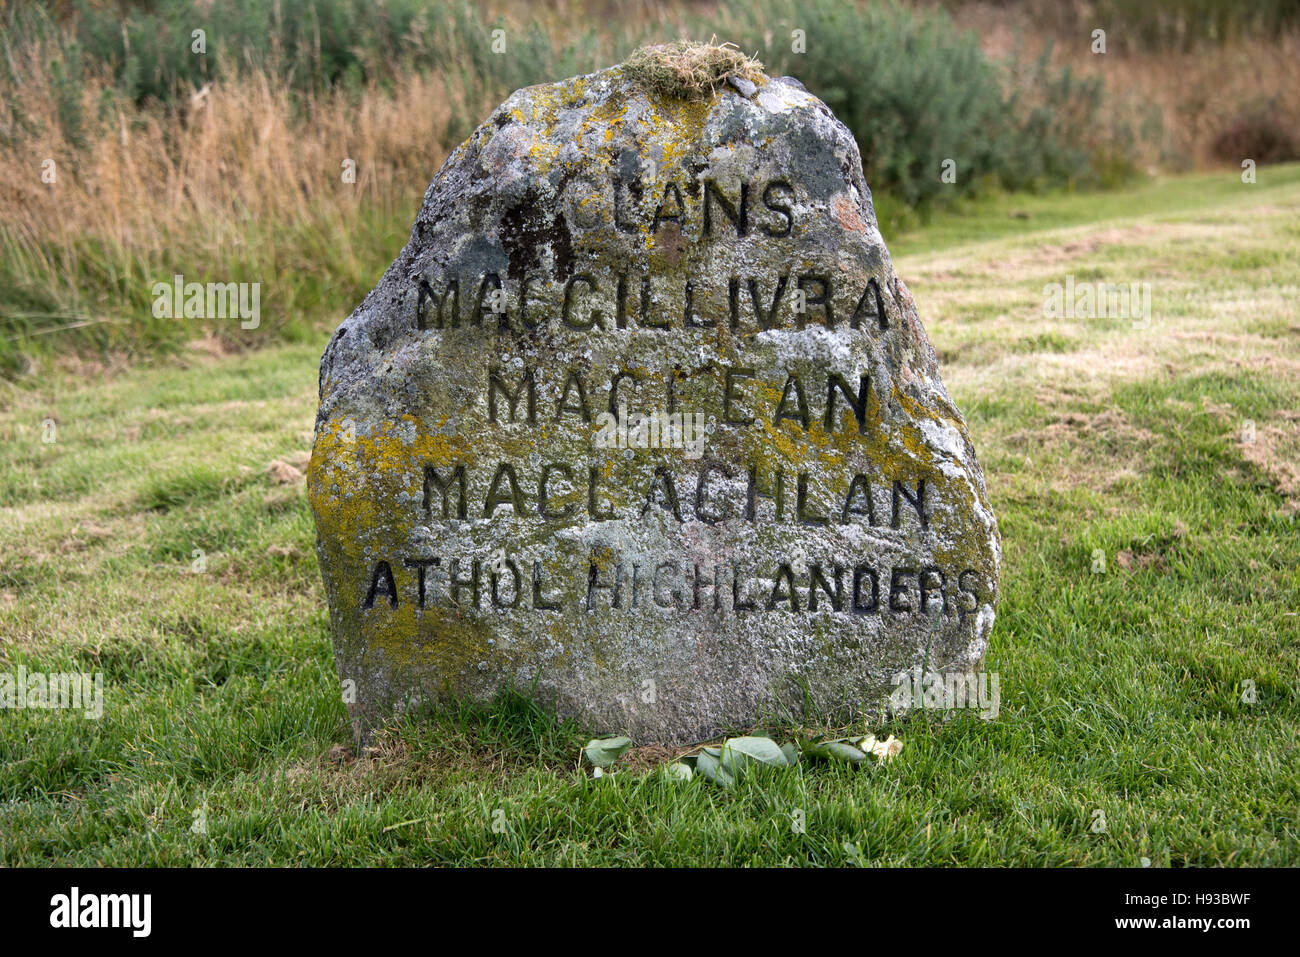 Battle of Culloden clan memorial stone marker (Clans MacGillivray, MacLean, MacLaghlan). Stock Photo